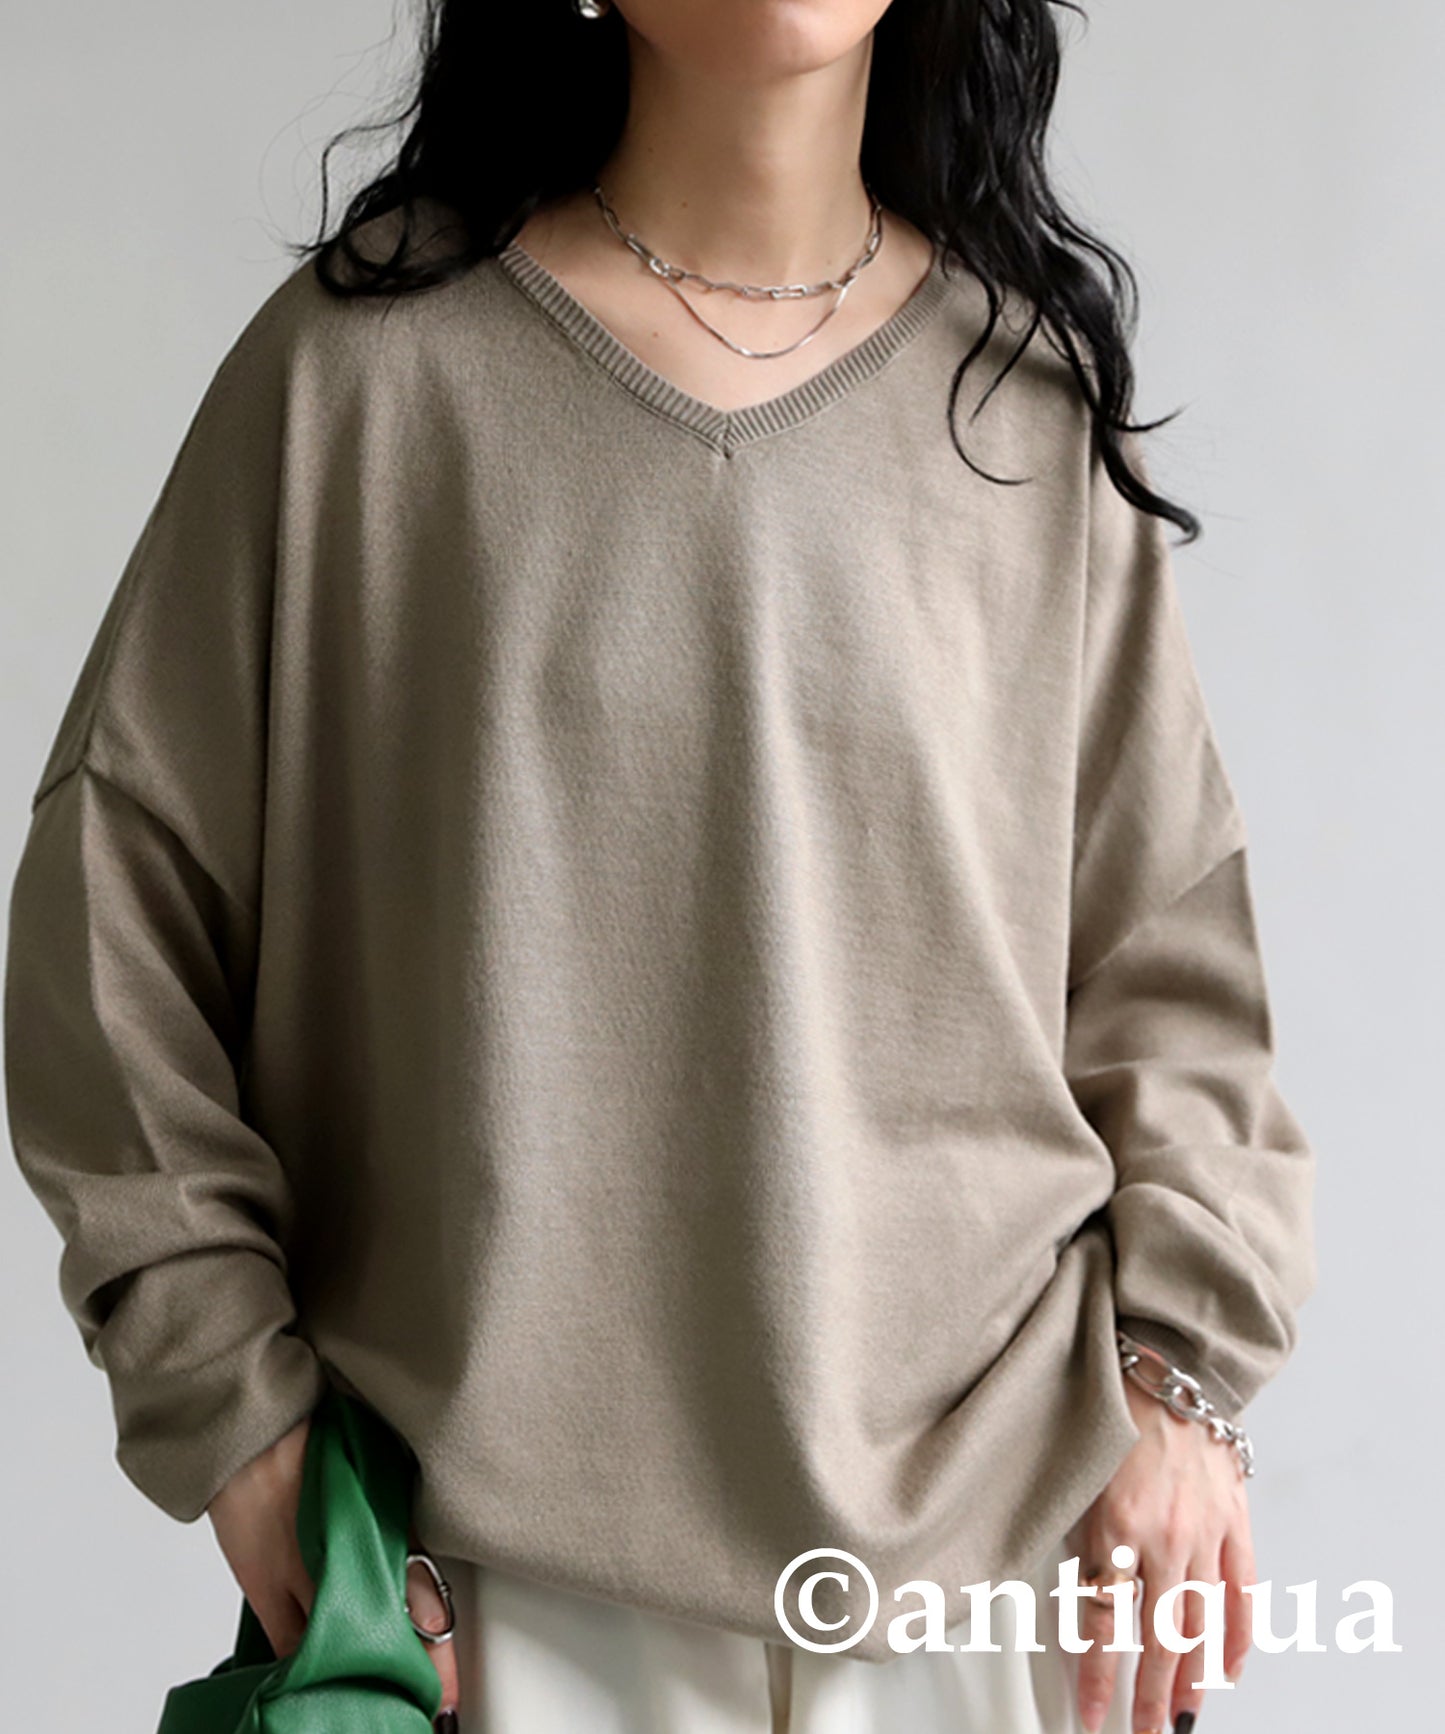 Function material knit tops long sleeves Ladies knit tops